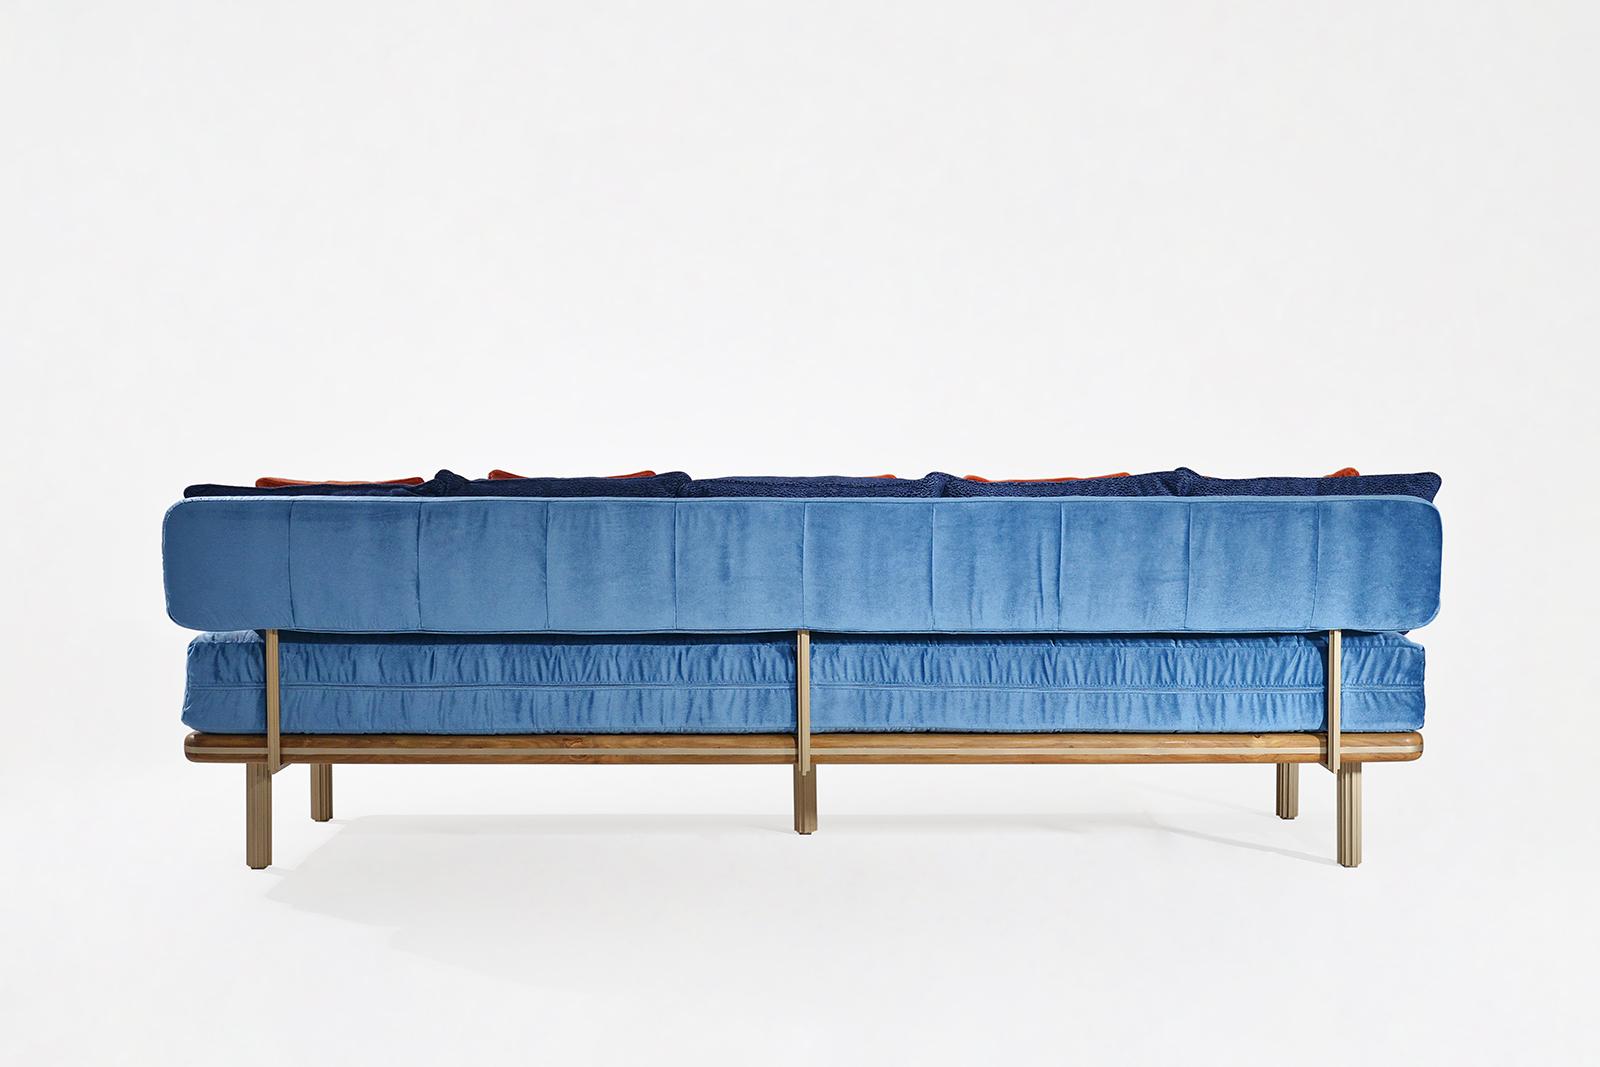 Welded Bespoke Sofa with rounded base edge, Inlaid with brass strip by P.Tendercool For Sale